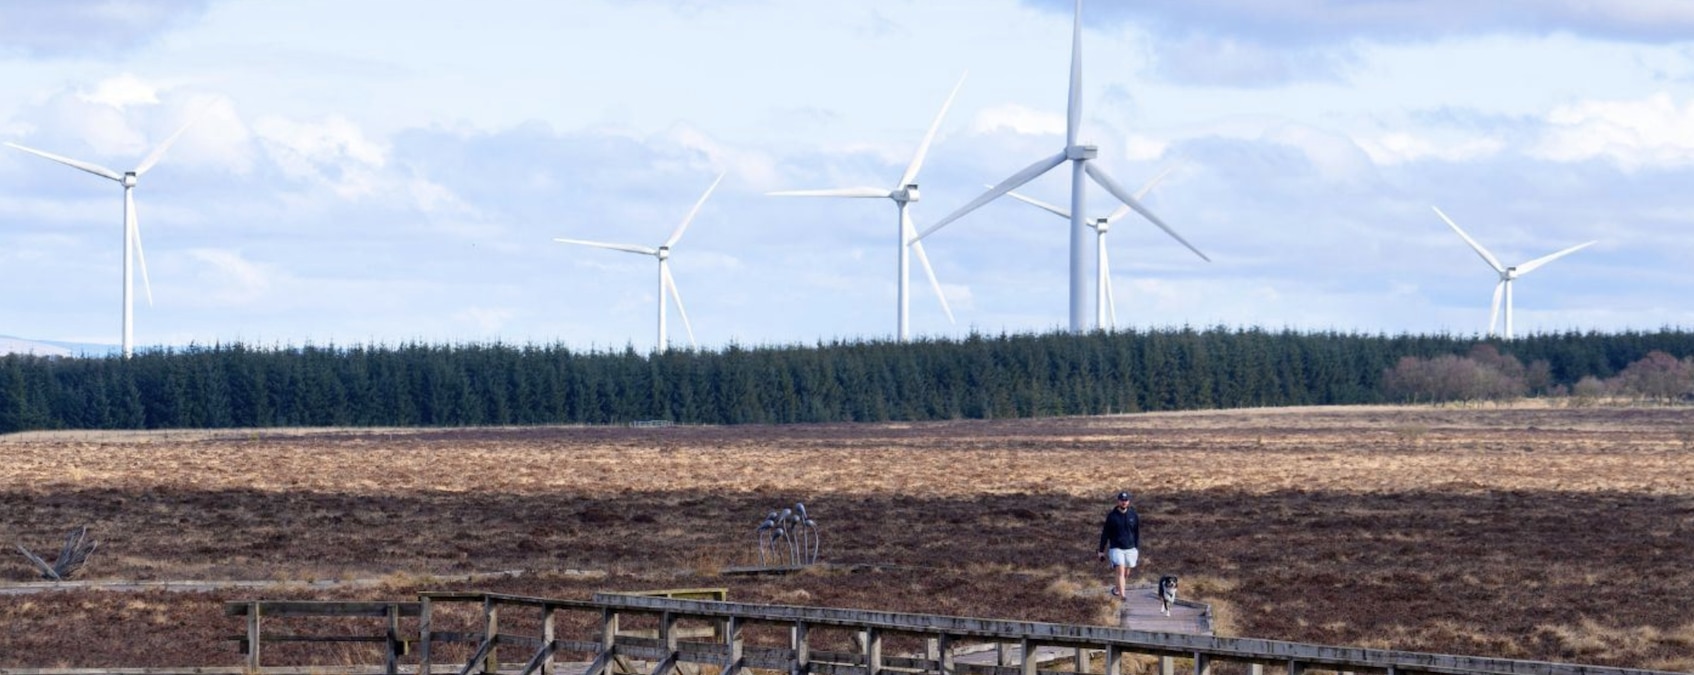 A wind farm in the UK